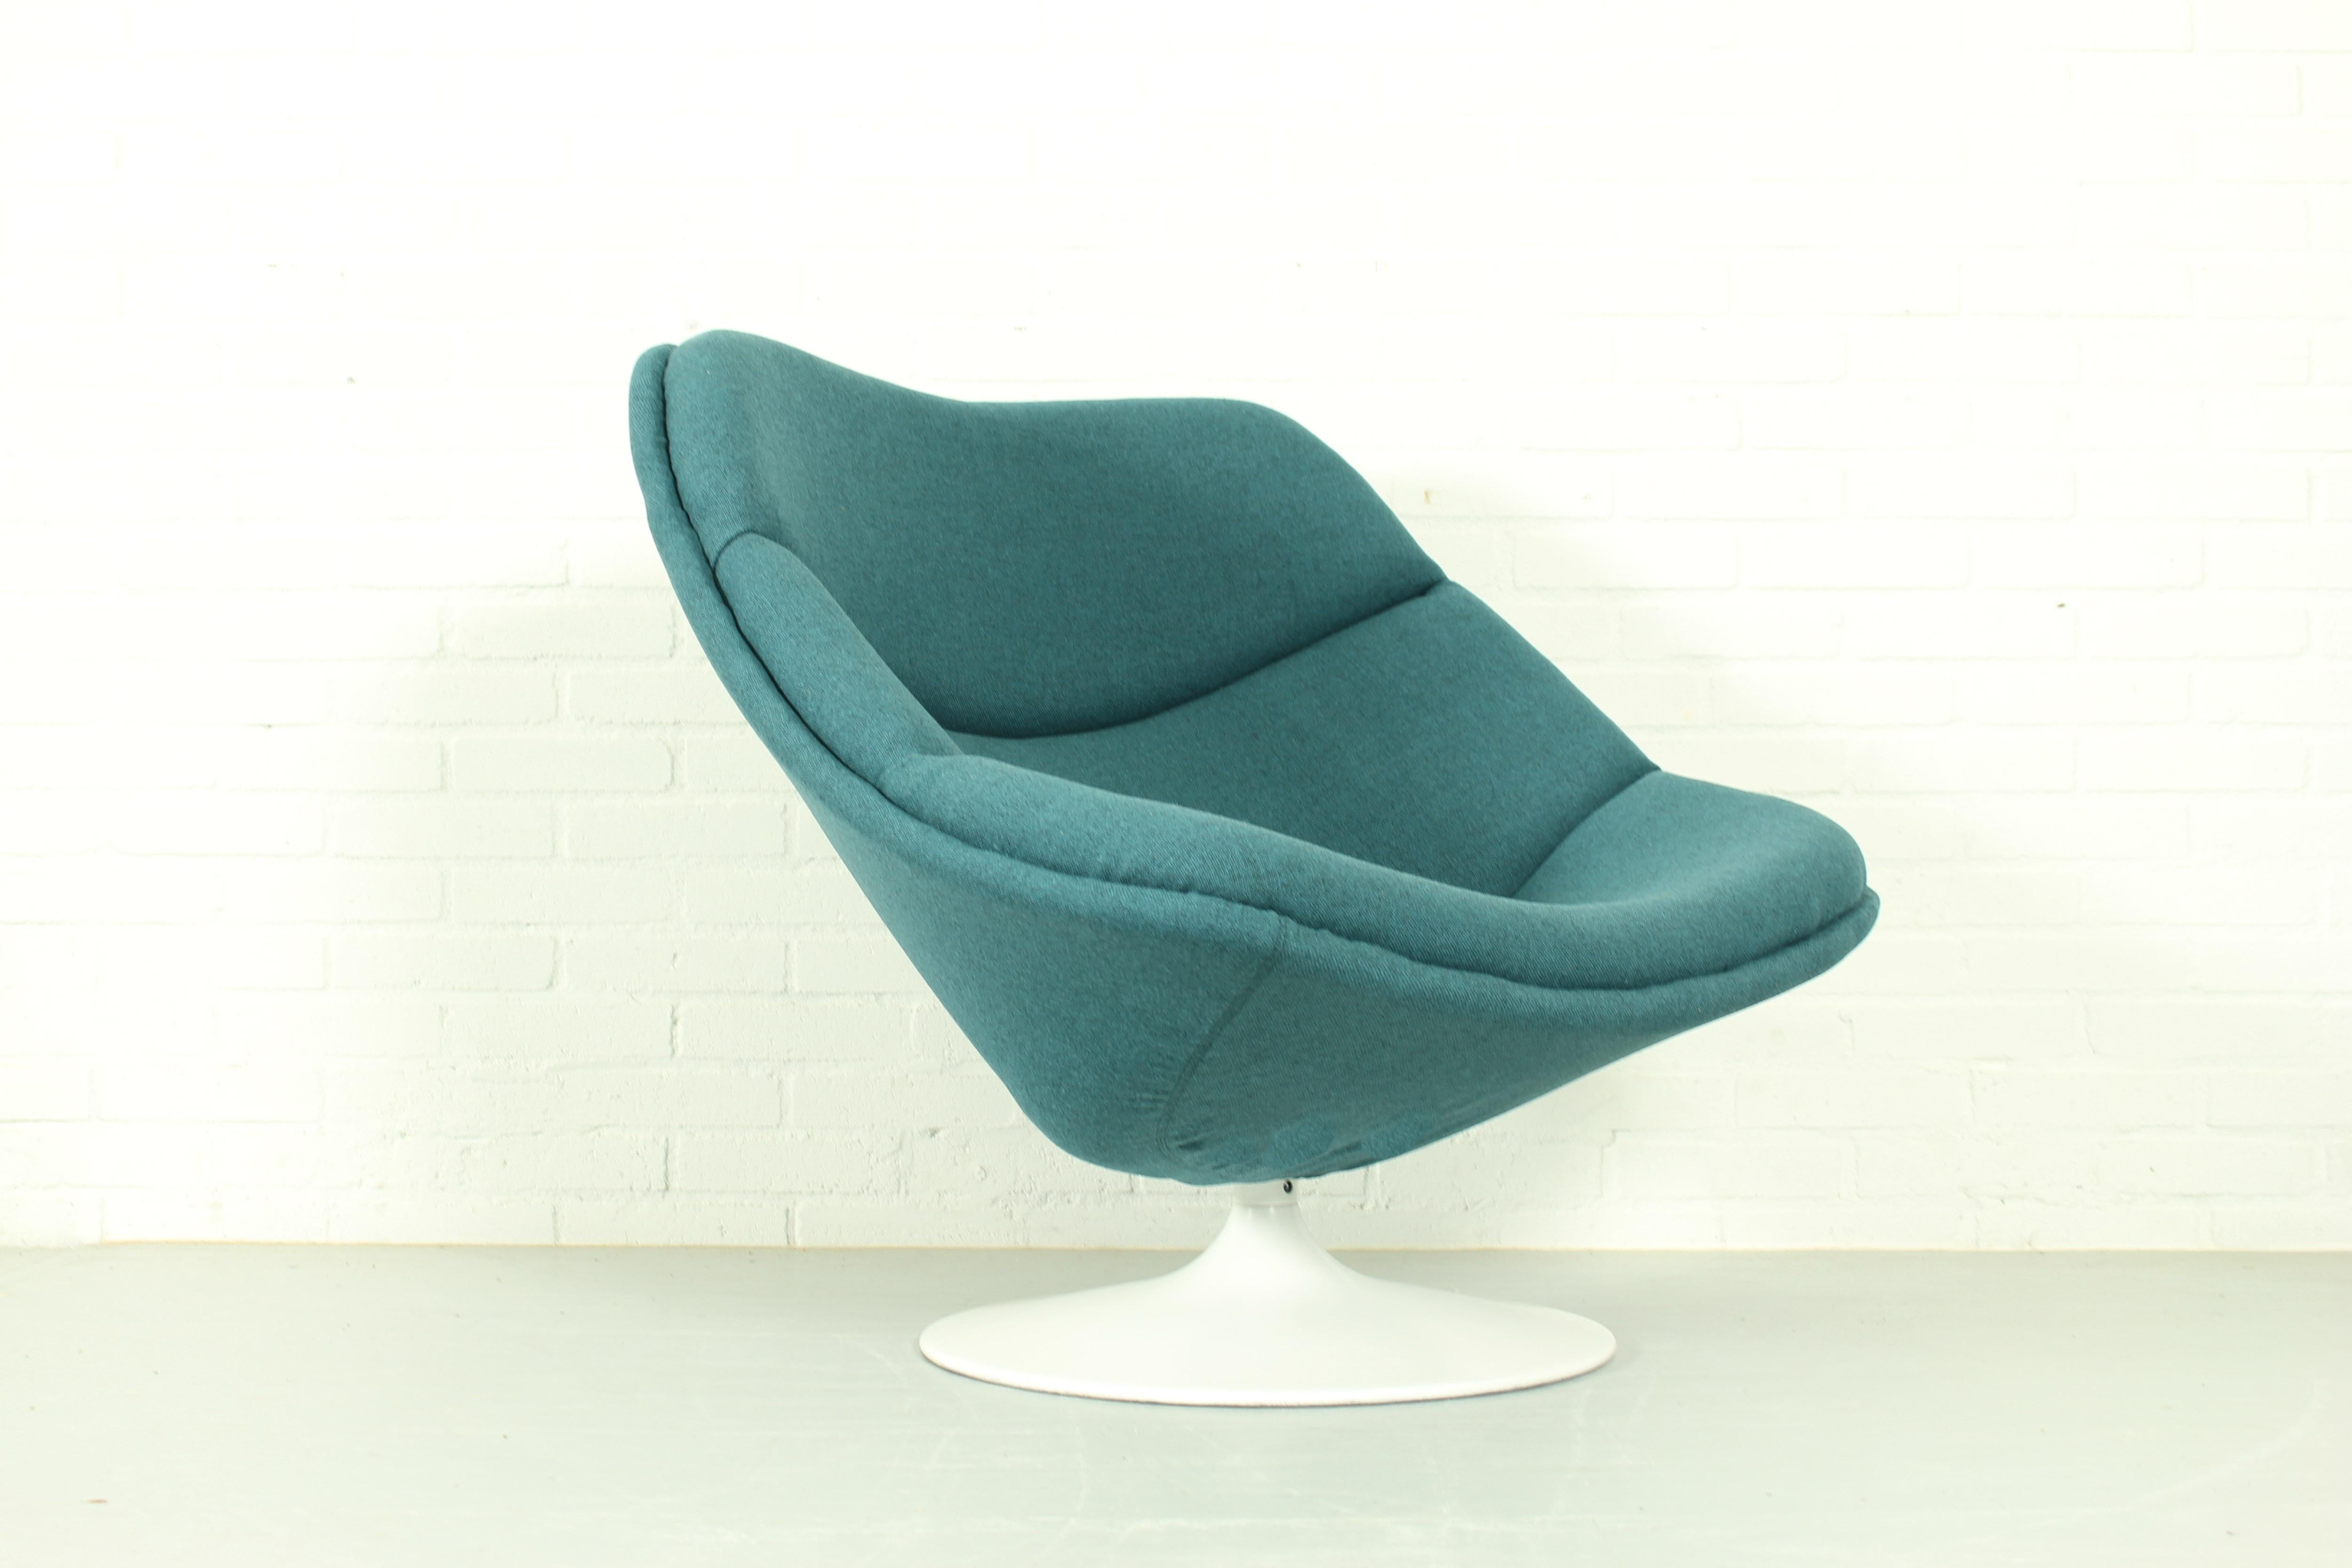 An original F557 swivel lounge chair by Pierre Paulin for Artifort 1960s. This chair has a steel base and is reupholstered in Kvadrat Tonica blue-green fabric. Precursor of the globe chair, this chair is no longer manufactured and was only produced